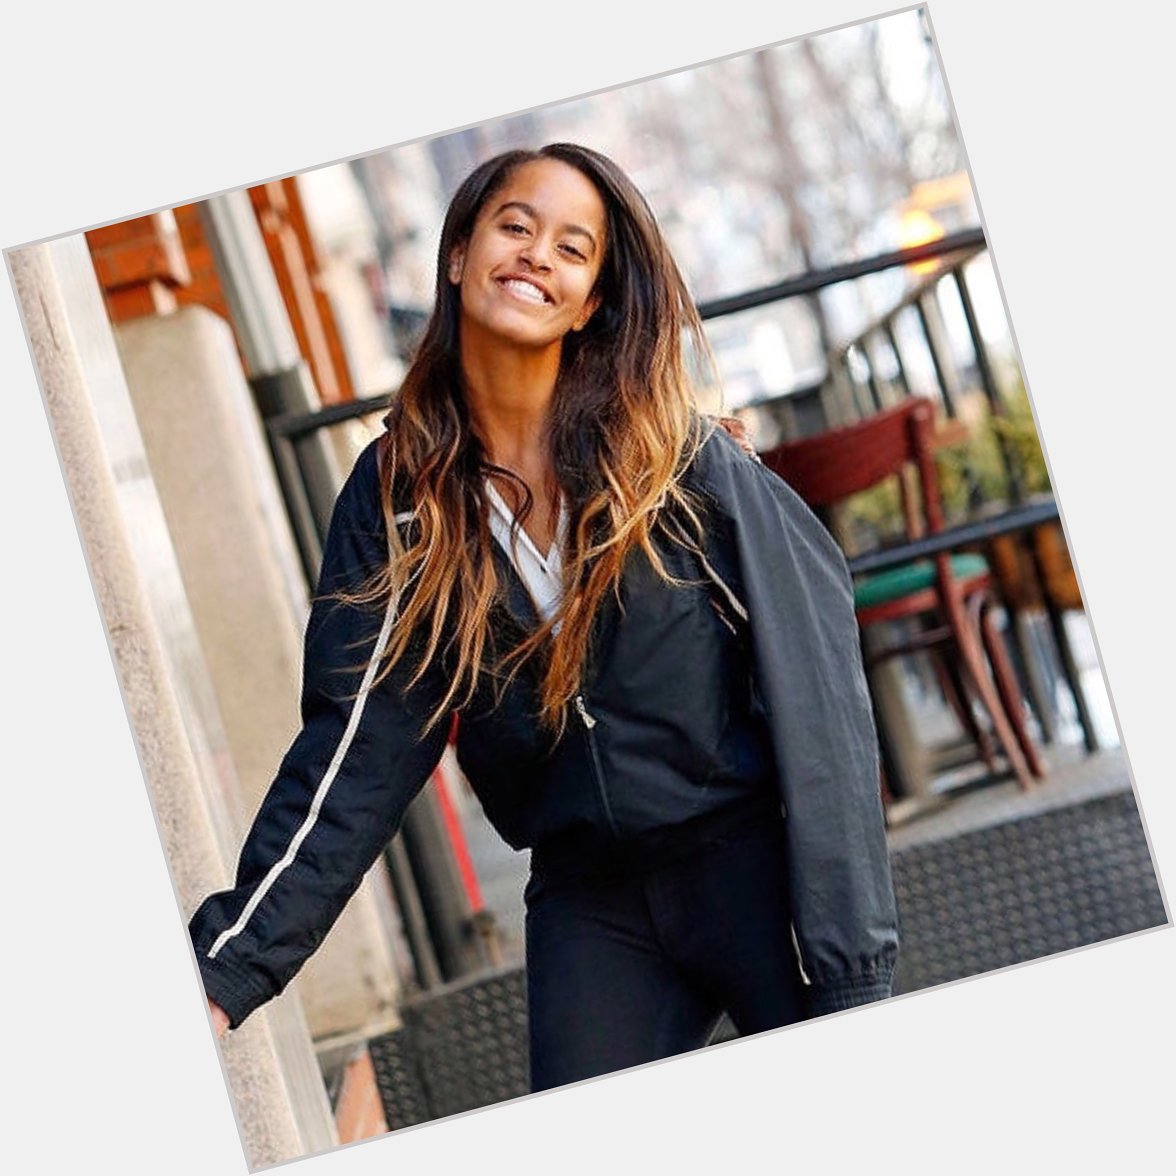 HAPPY 20th BIRTHDAY and lots of love to Malia Obama. 